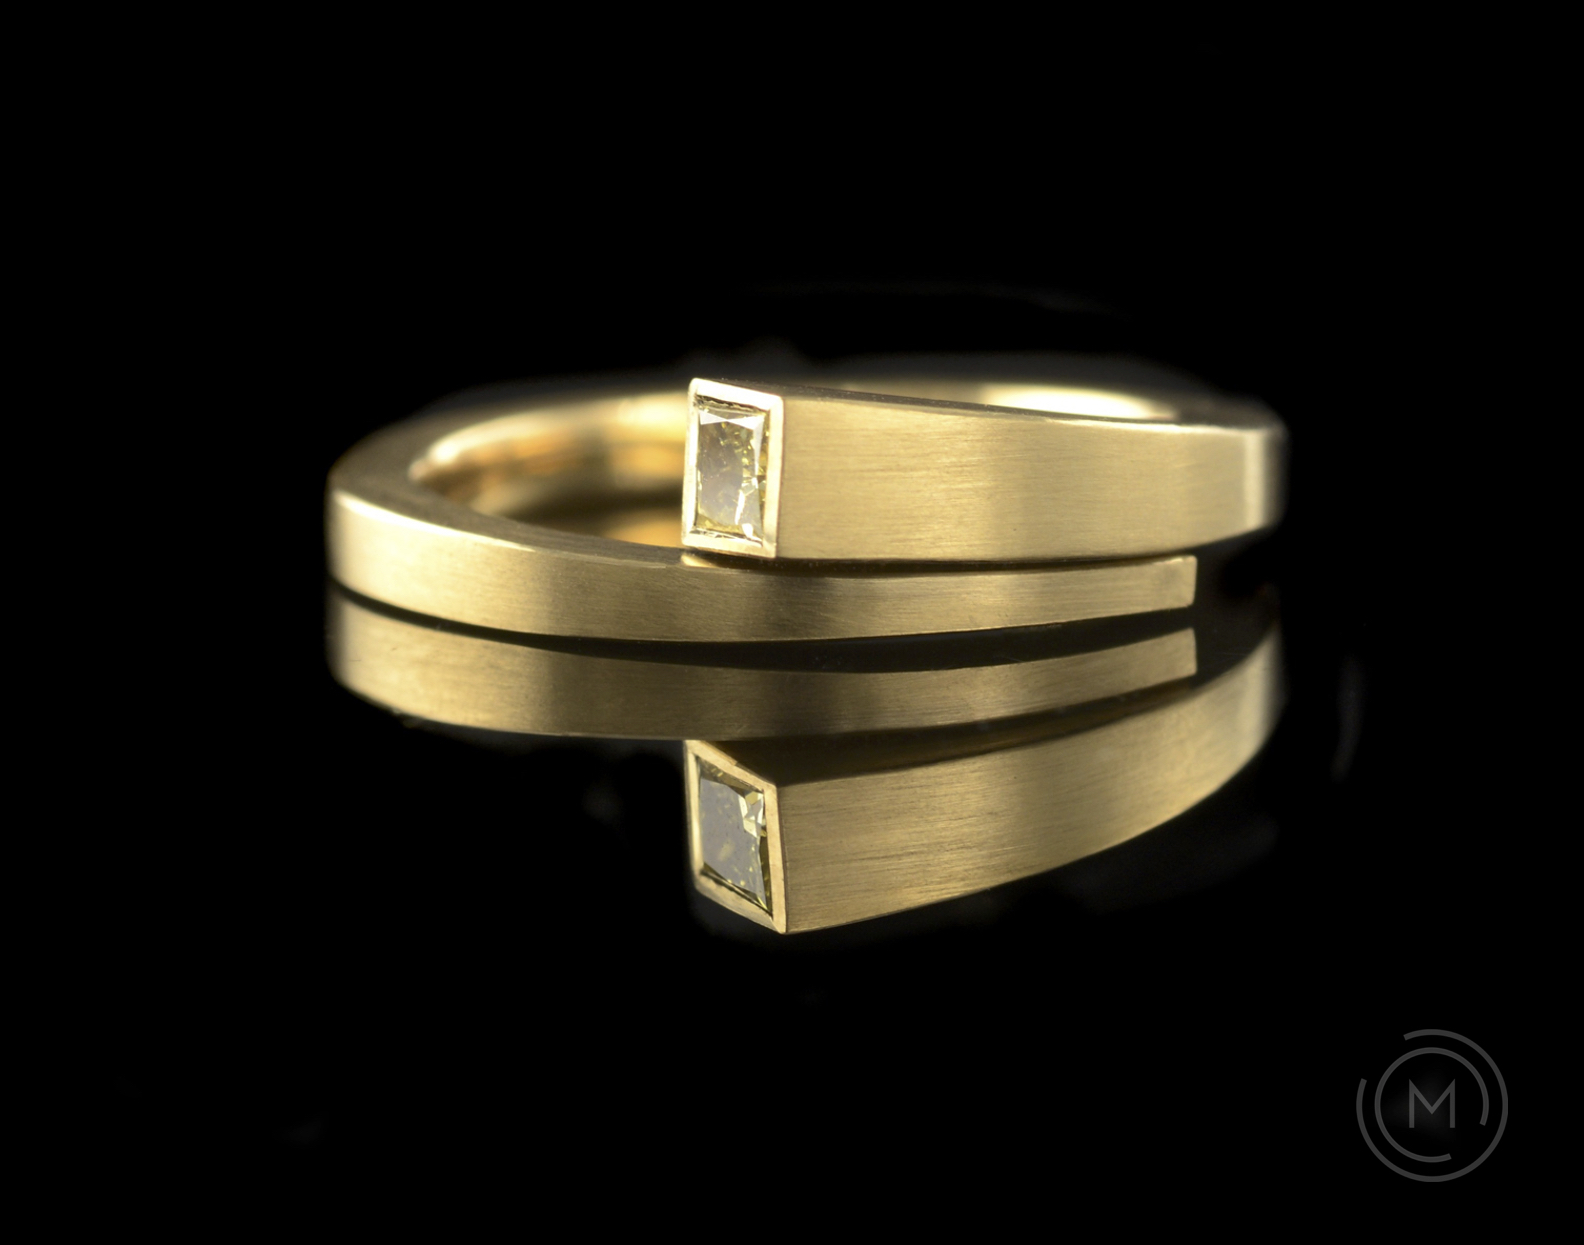 Modern 'Overlap' diamond engagement ring hand-forged from yellow gold and set with a princess cut yellow diamond